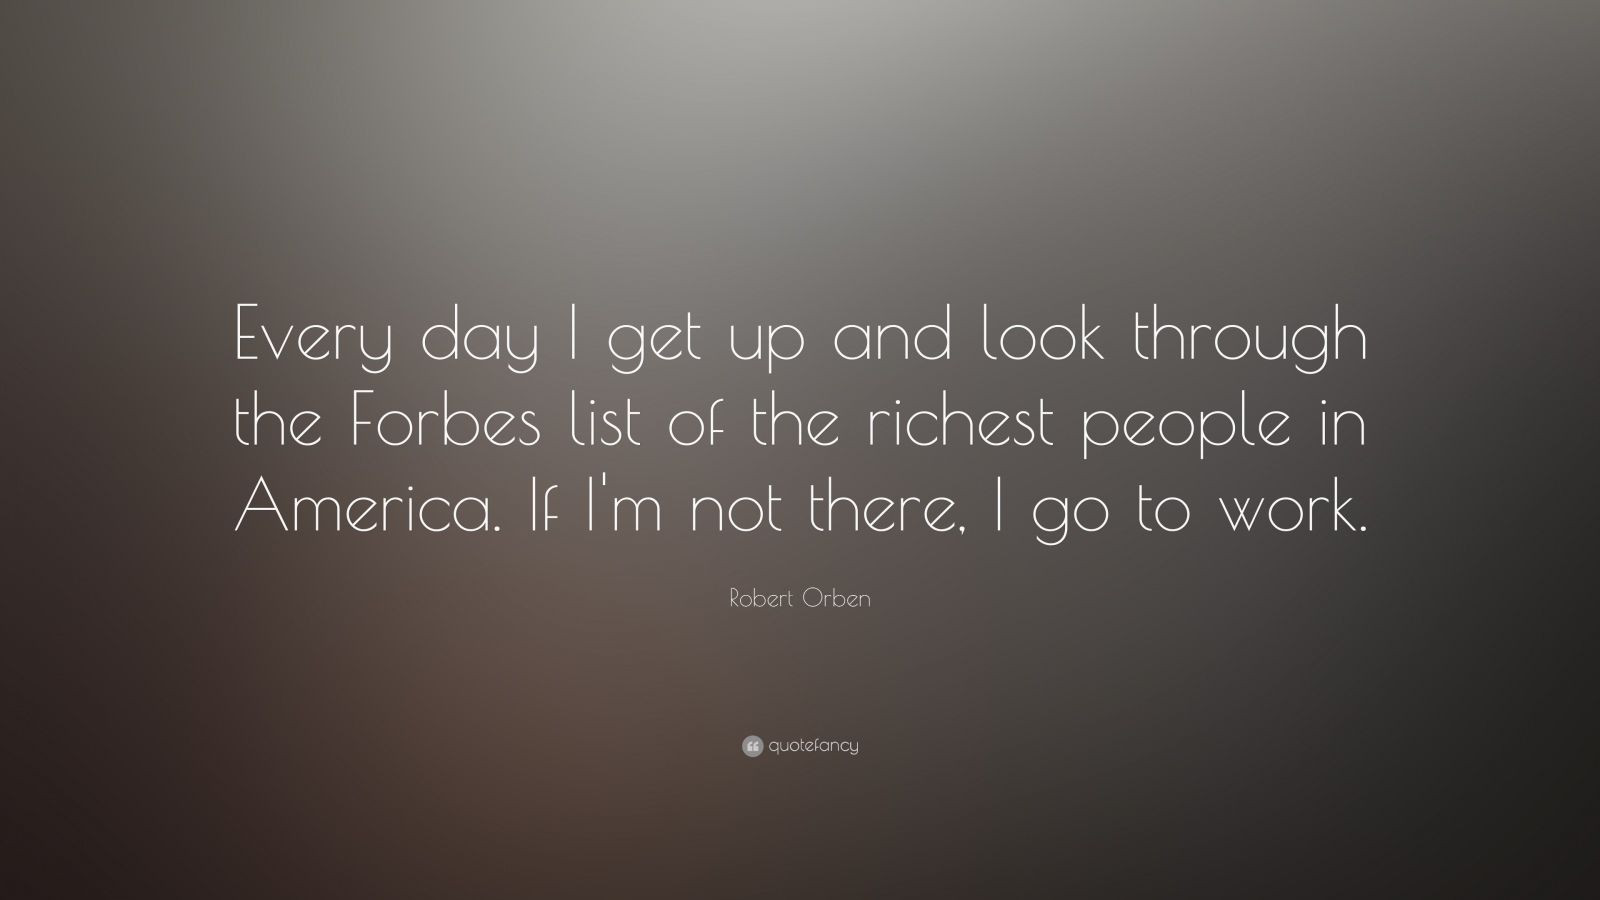 Forbes Motivational Quotes
 Robert Orben Quote “Every day I up and look through